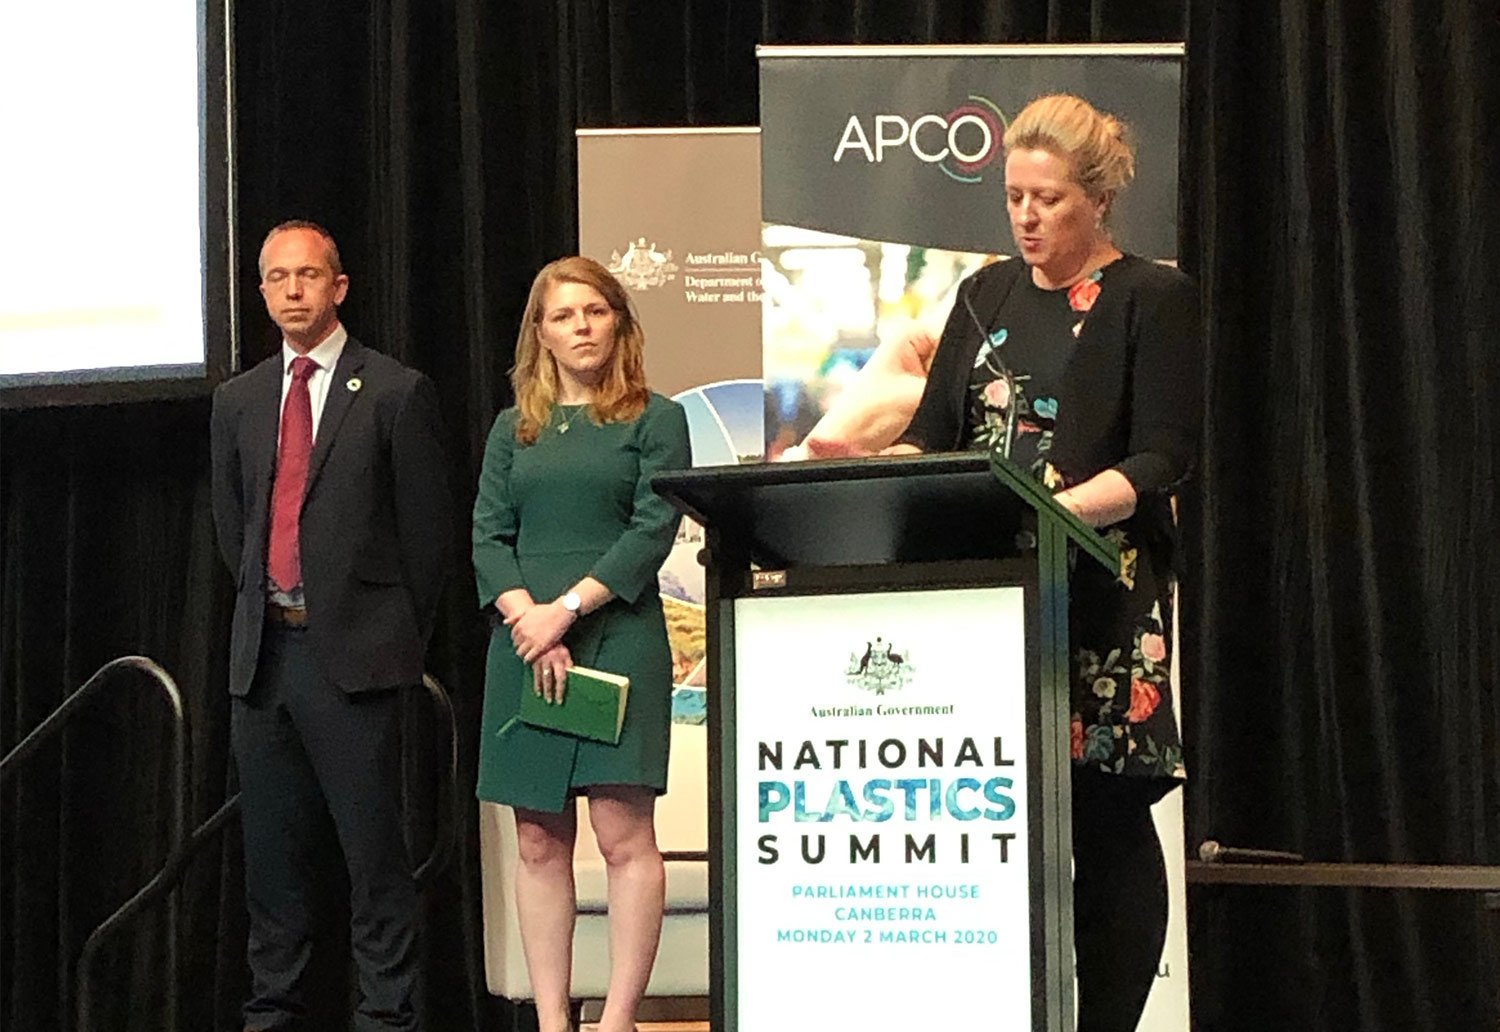 Image of Brooke Donnelly - CEO of APCO presenting at the National Plastics Summit